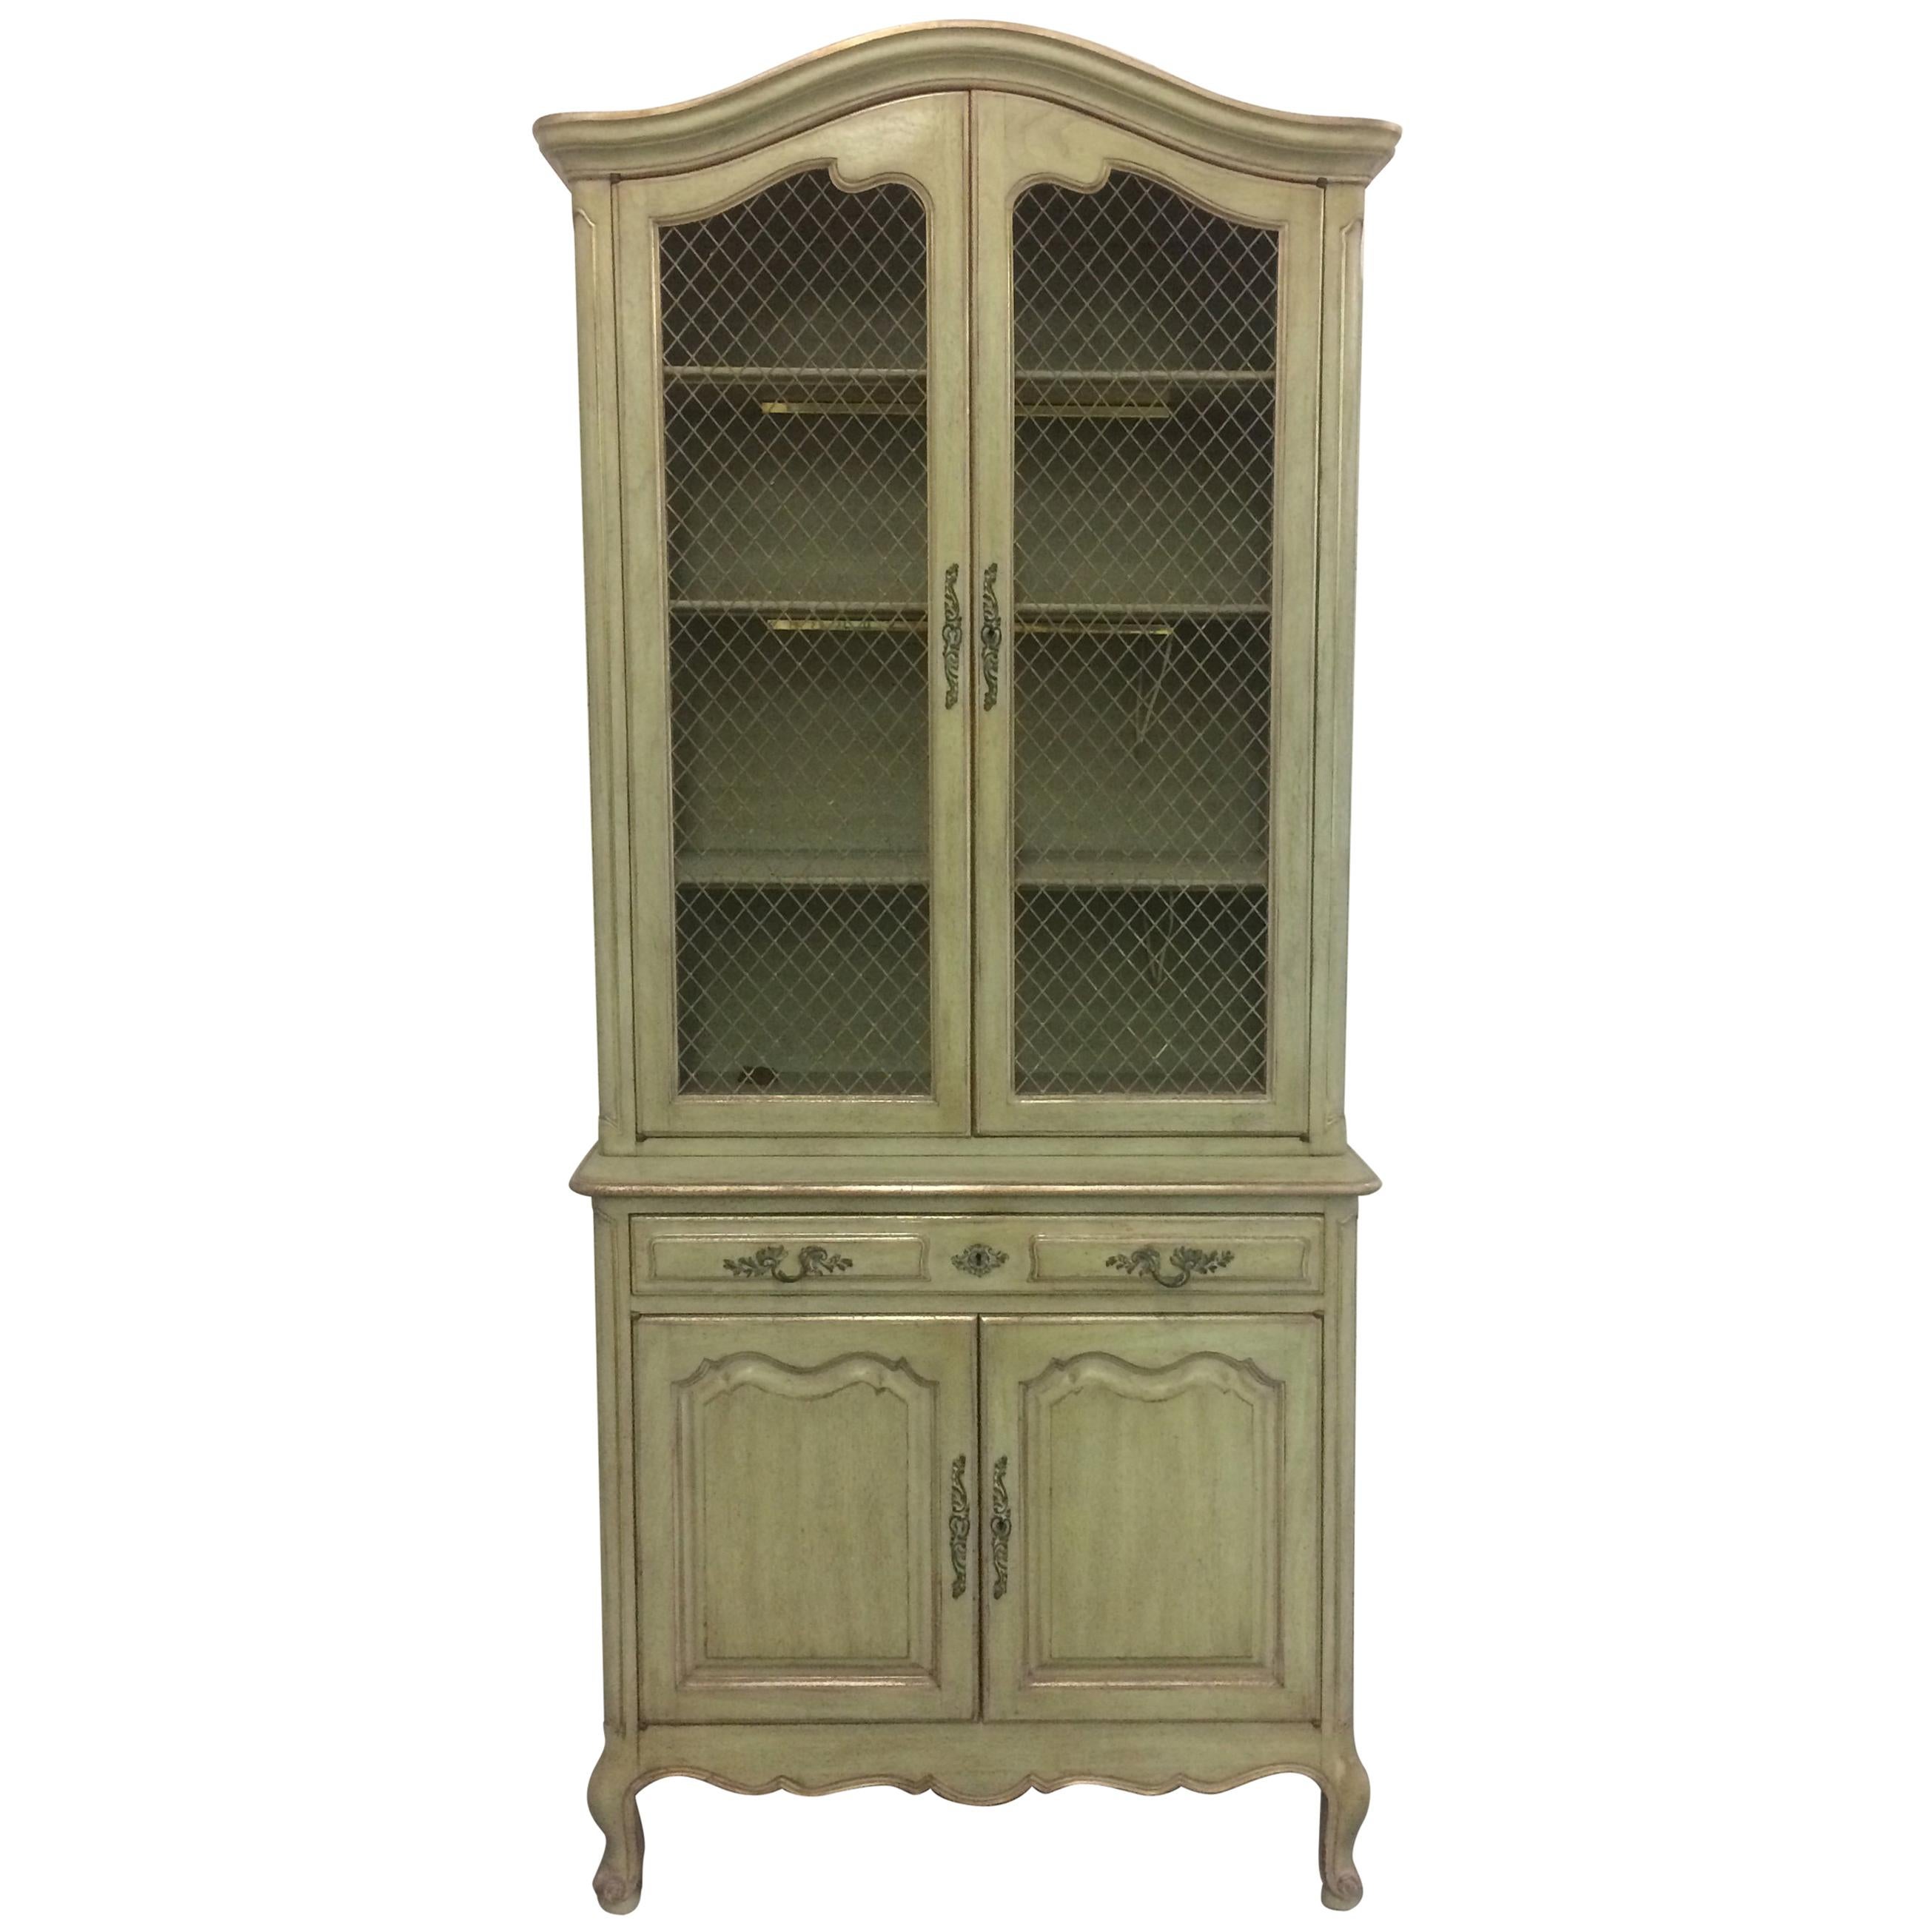 French Provincial Stepback Cupboard with Wire Mesh